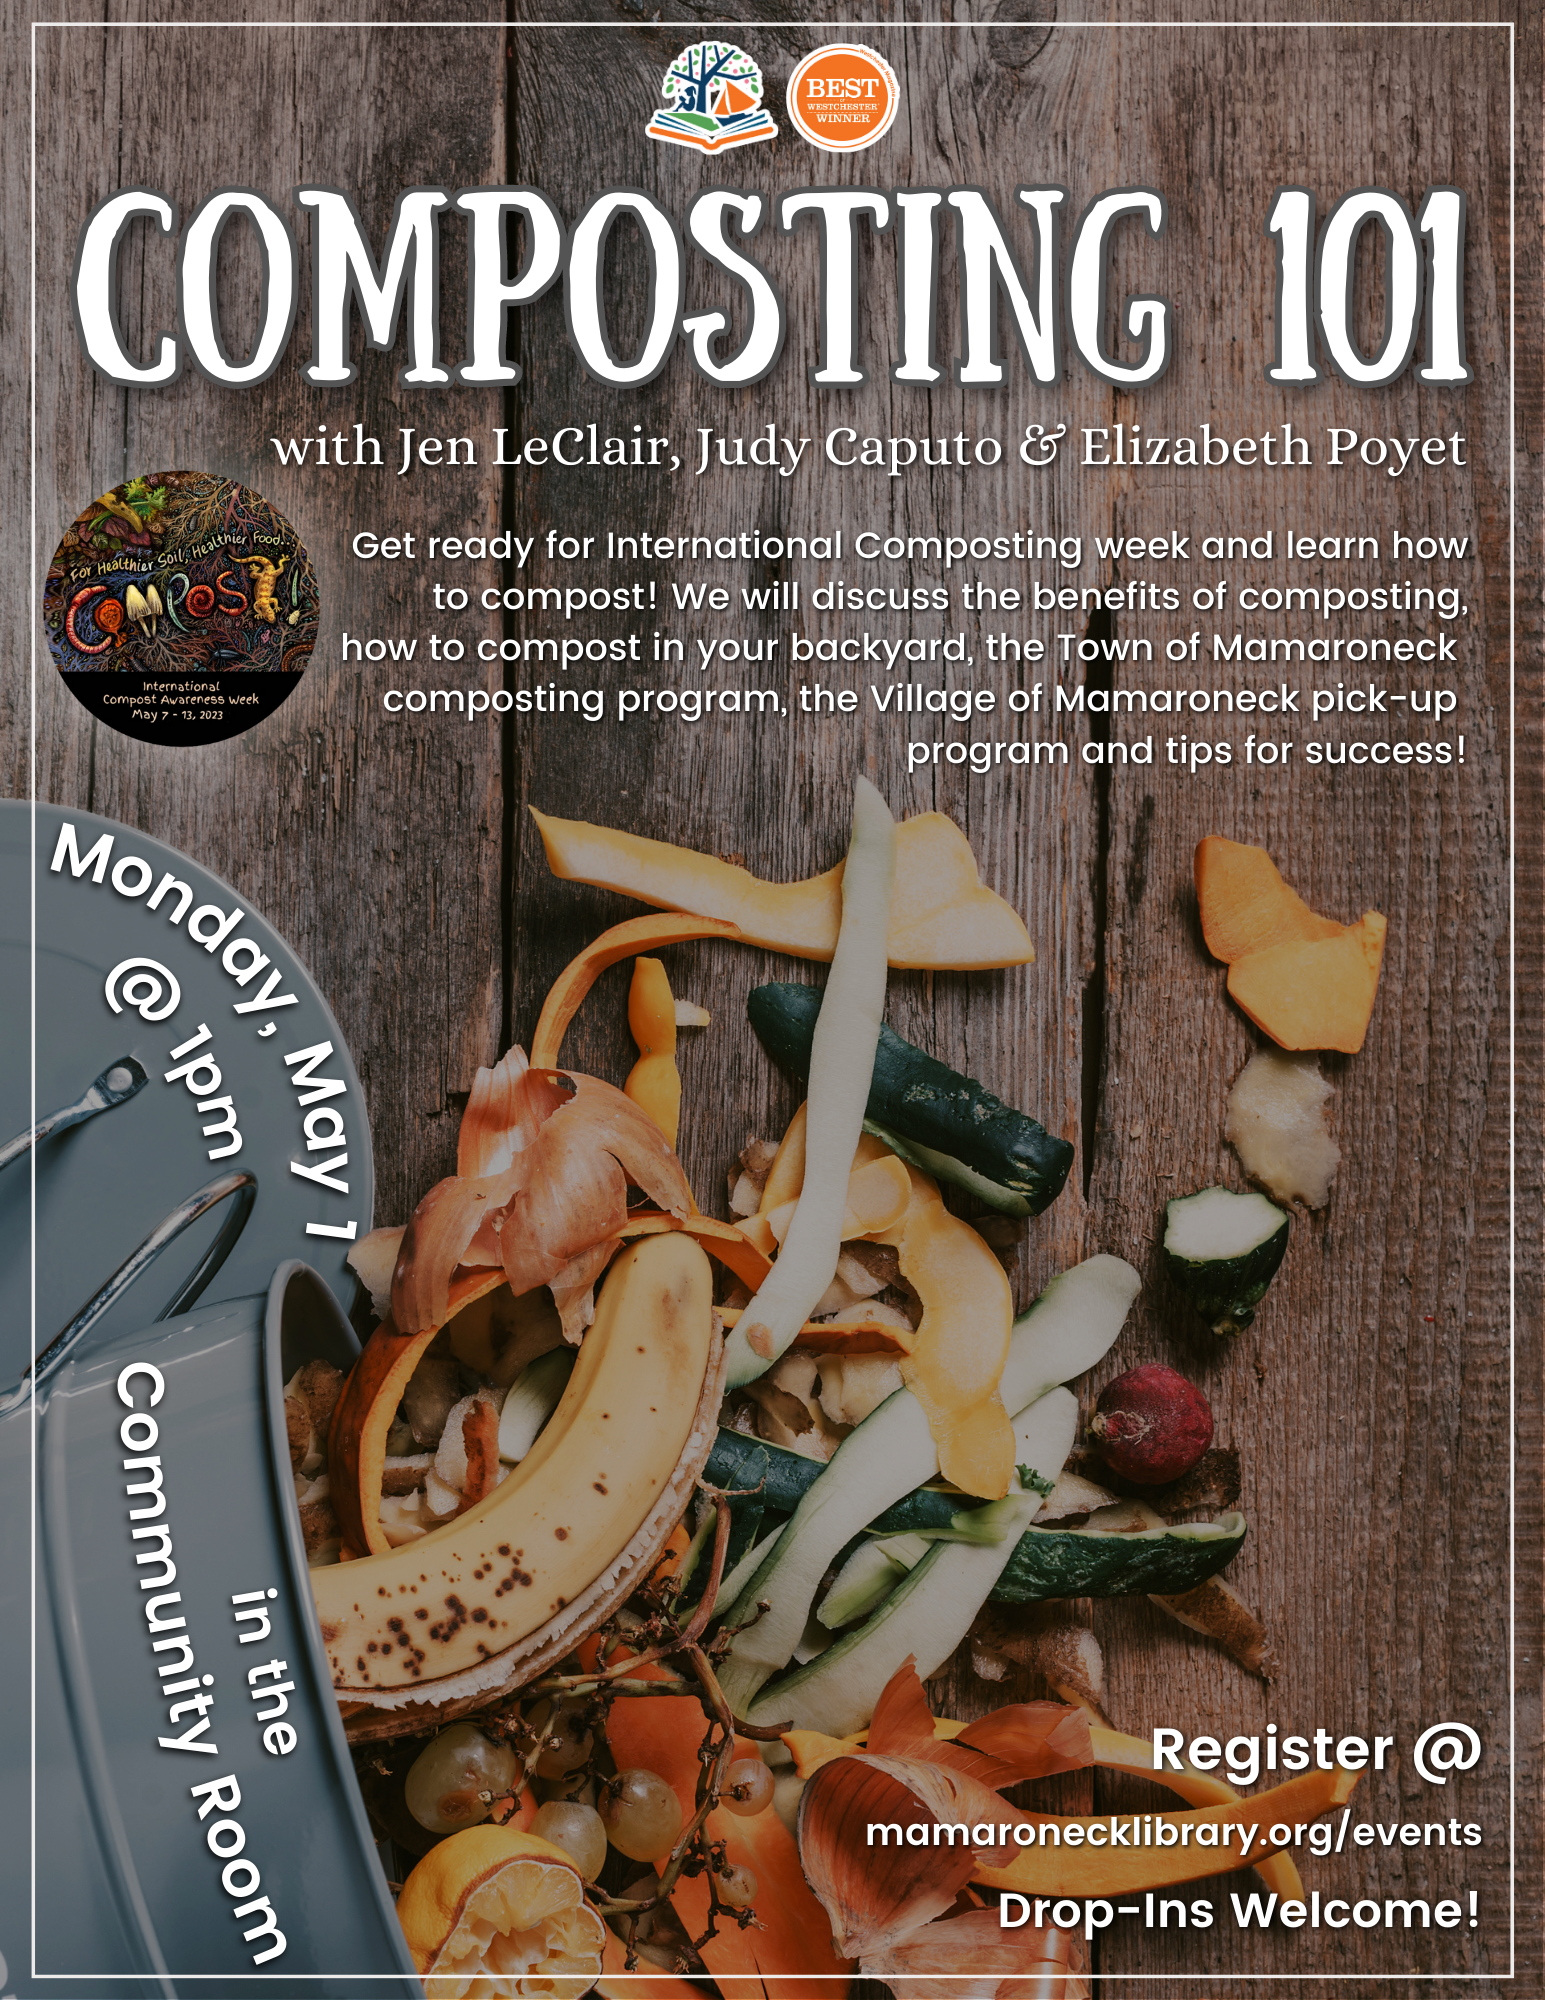 5/1 @1pm in the community room: Composting 101